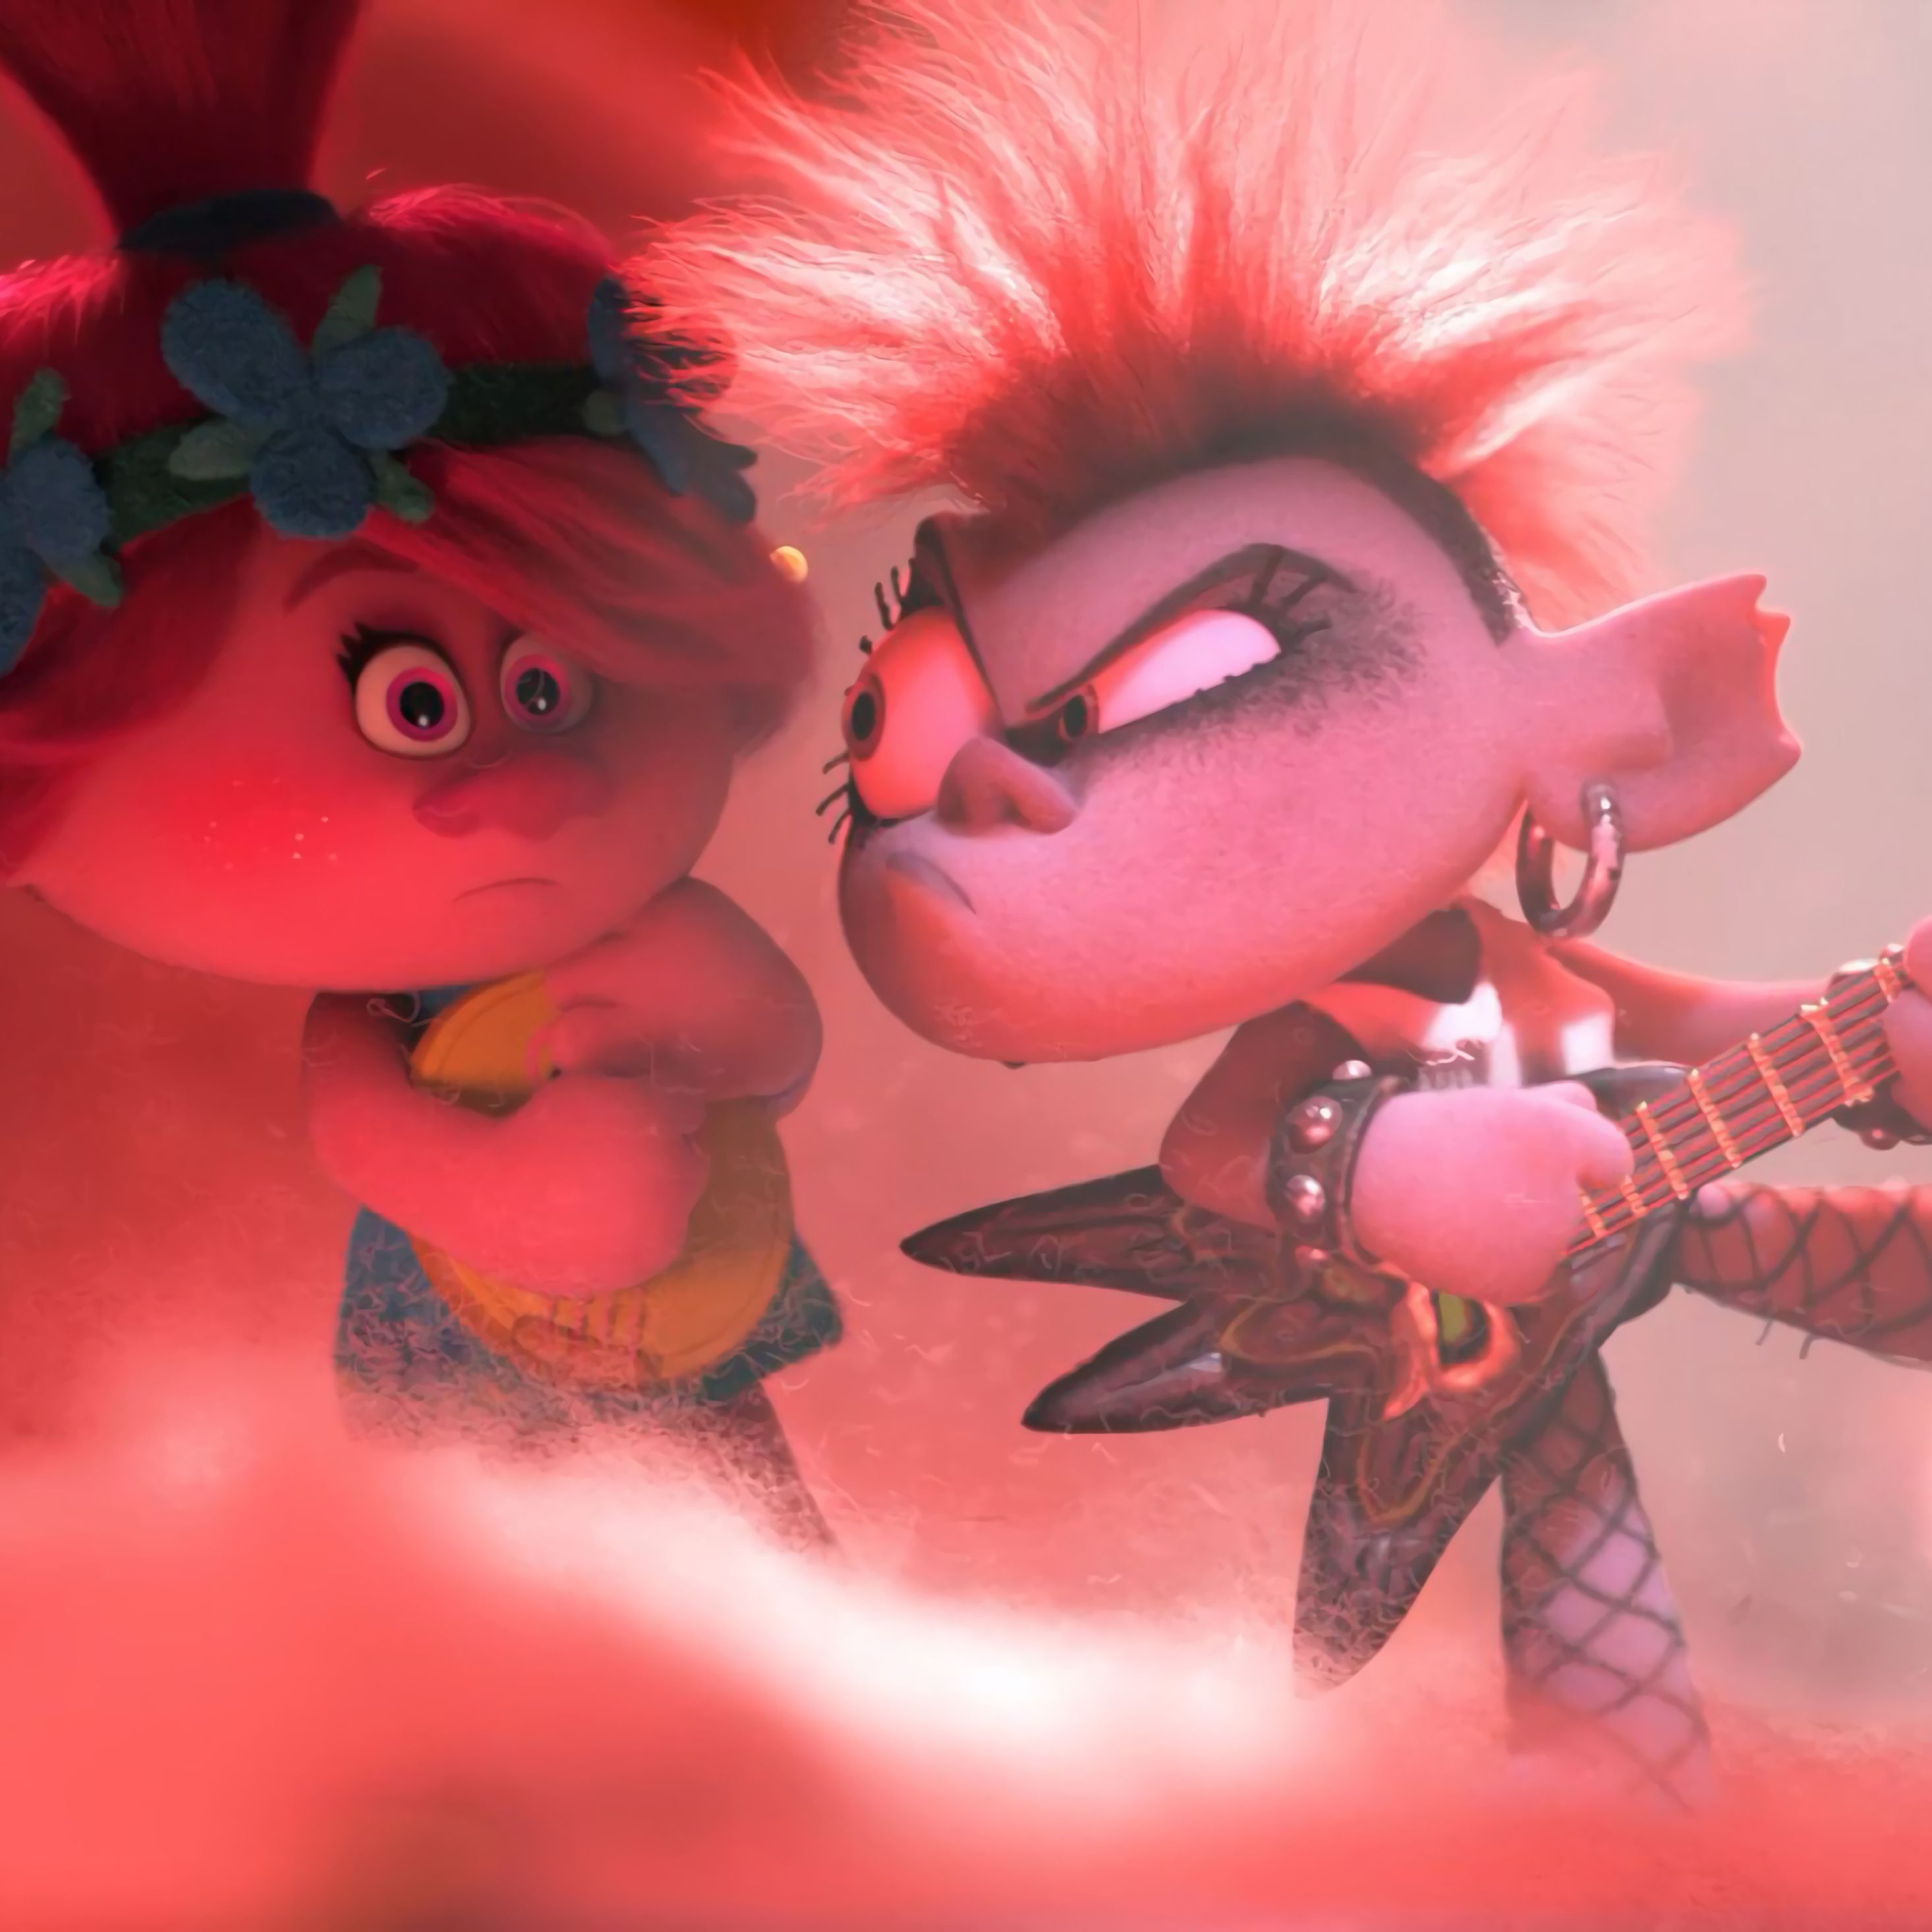 Poppy and Queen Barb In Trolls World Tour iPad Pro